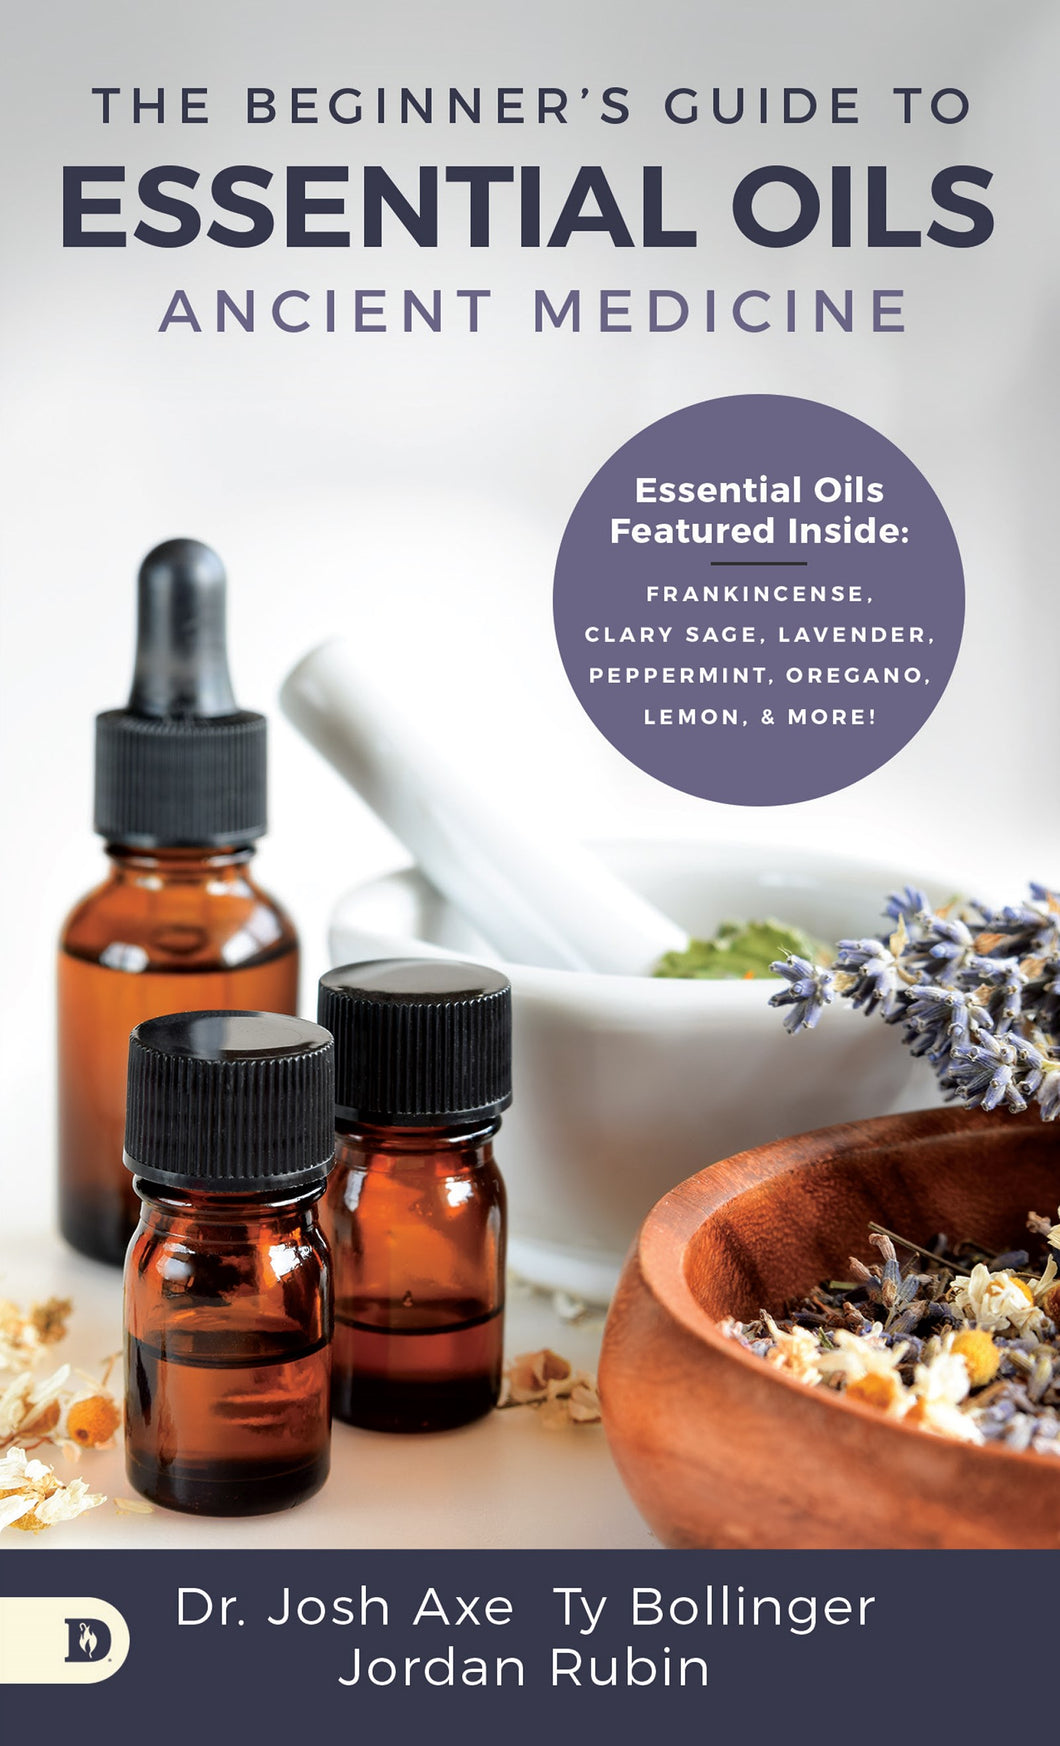 The Beginner's Guide To Essential Oils